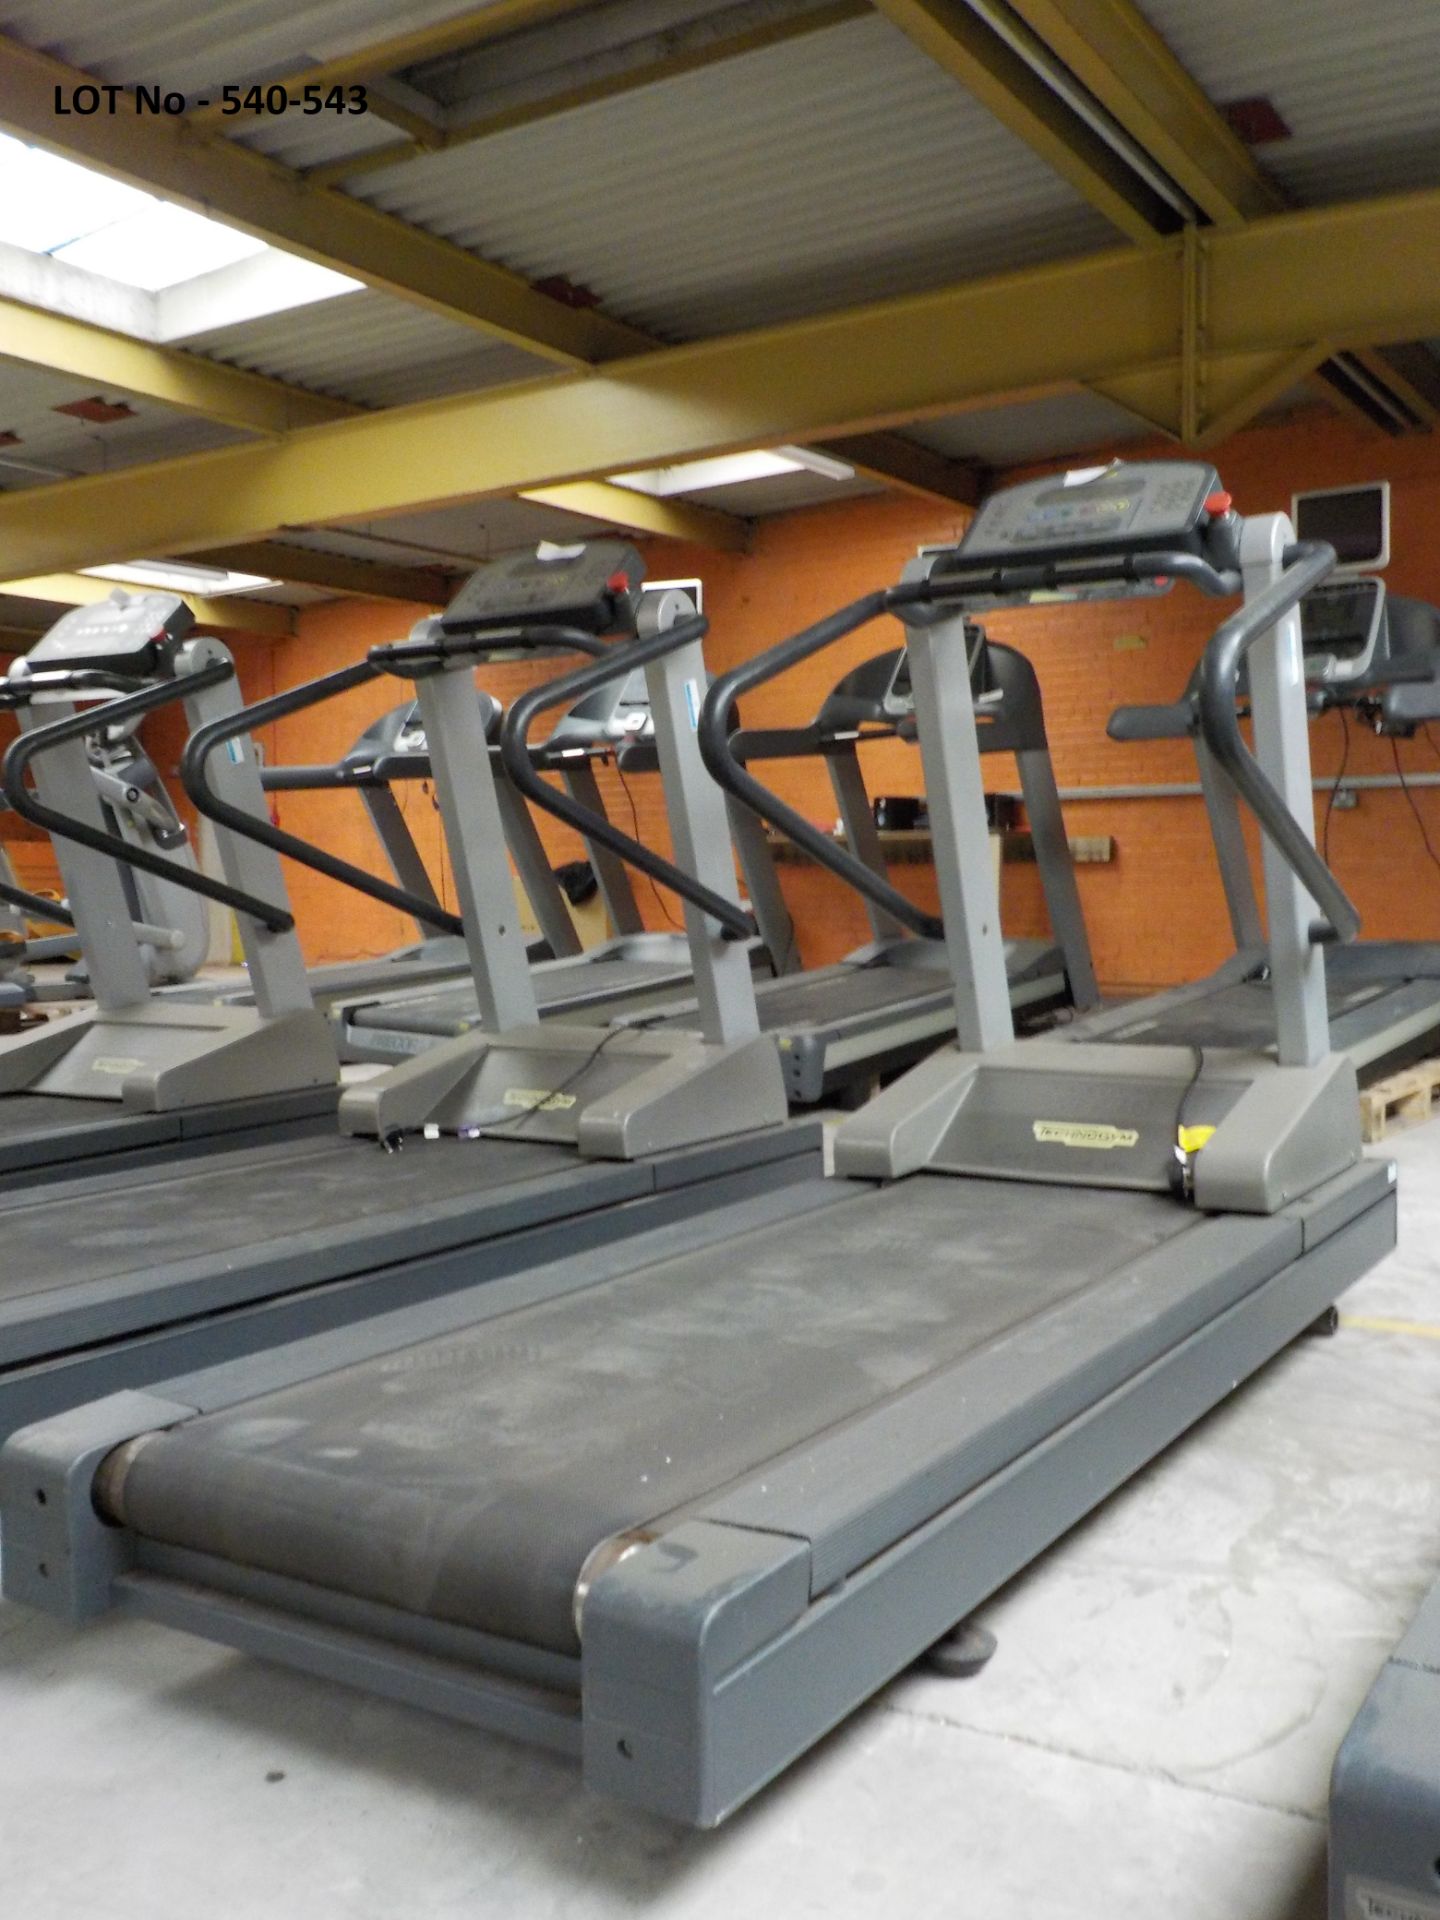 TECHNO GYM TREADMILL - RUN XT PRO - serial number D390-ING-E-787 *PLEASE NOTE - this lot is to be